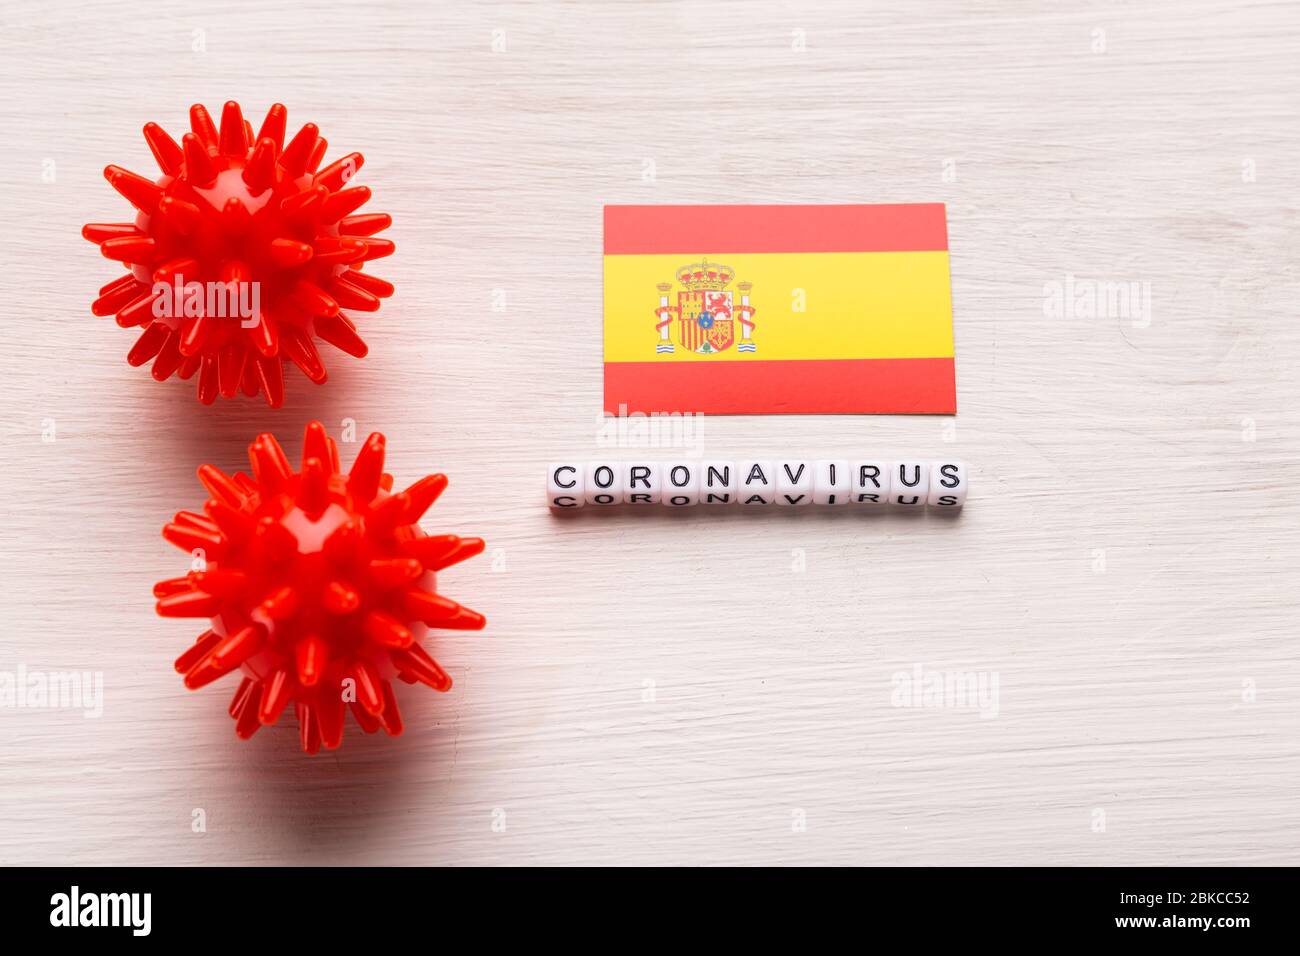 Abstract virus strain model of 2019-nCoV middle East respiratory syndrome coronavirus or coronavirus COVID-19 with text and flag Spain on white Stock Photo